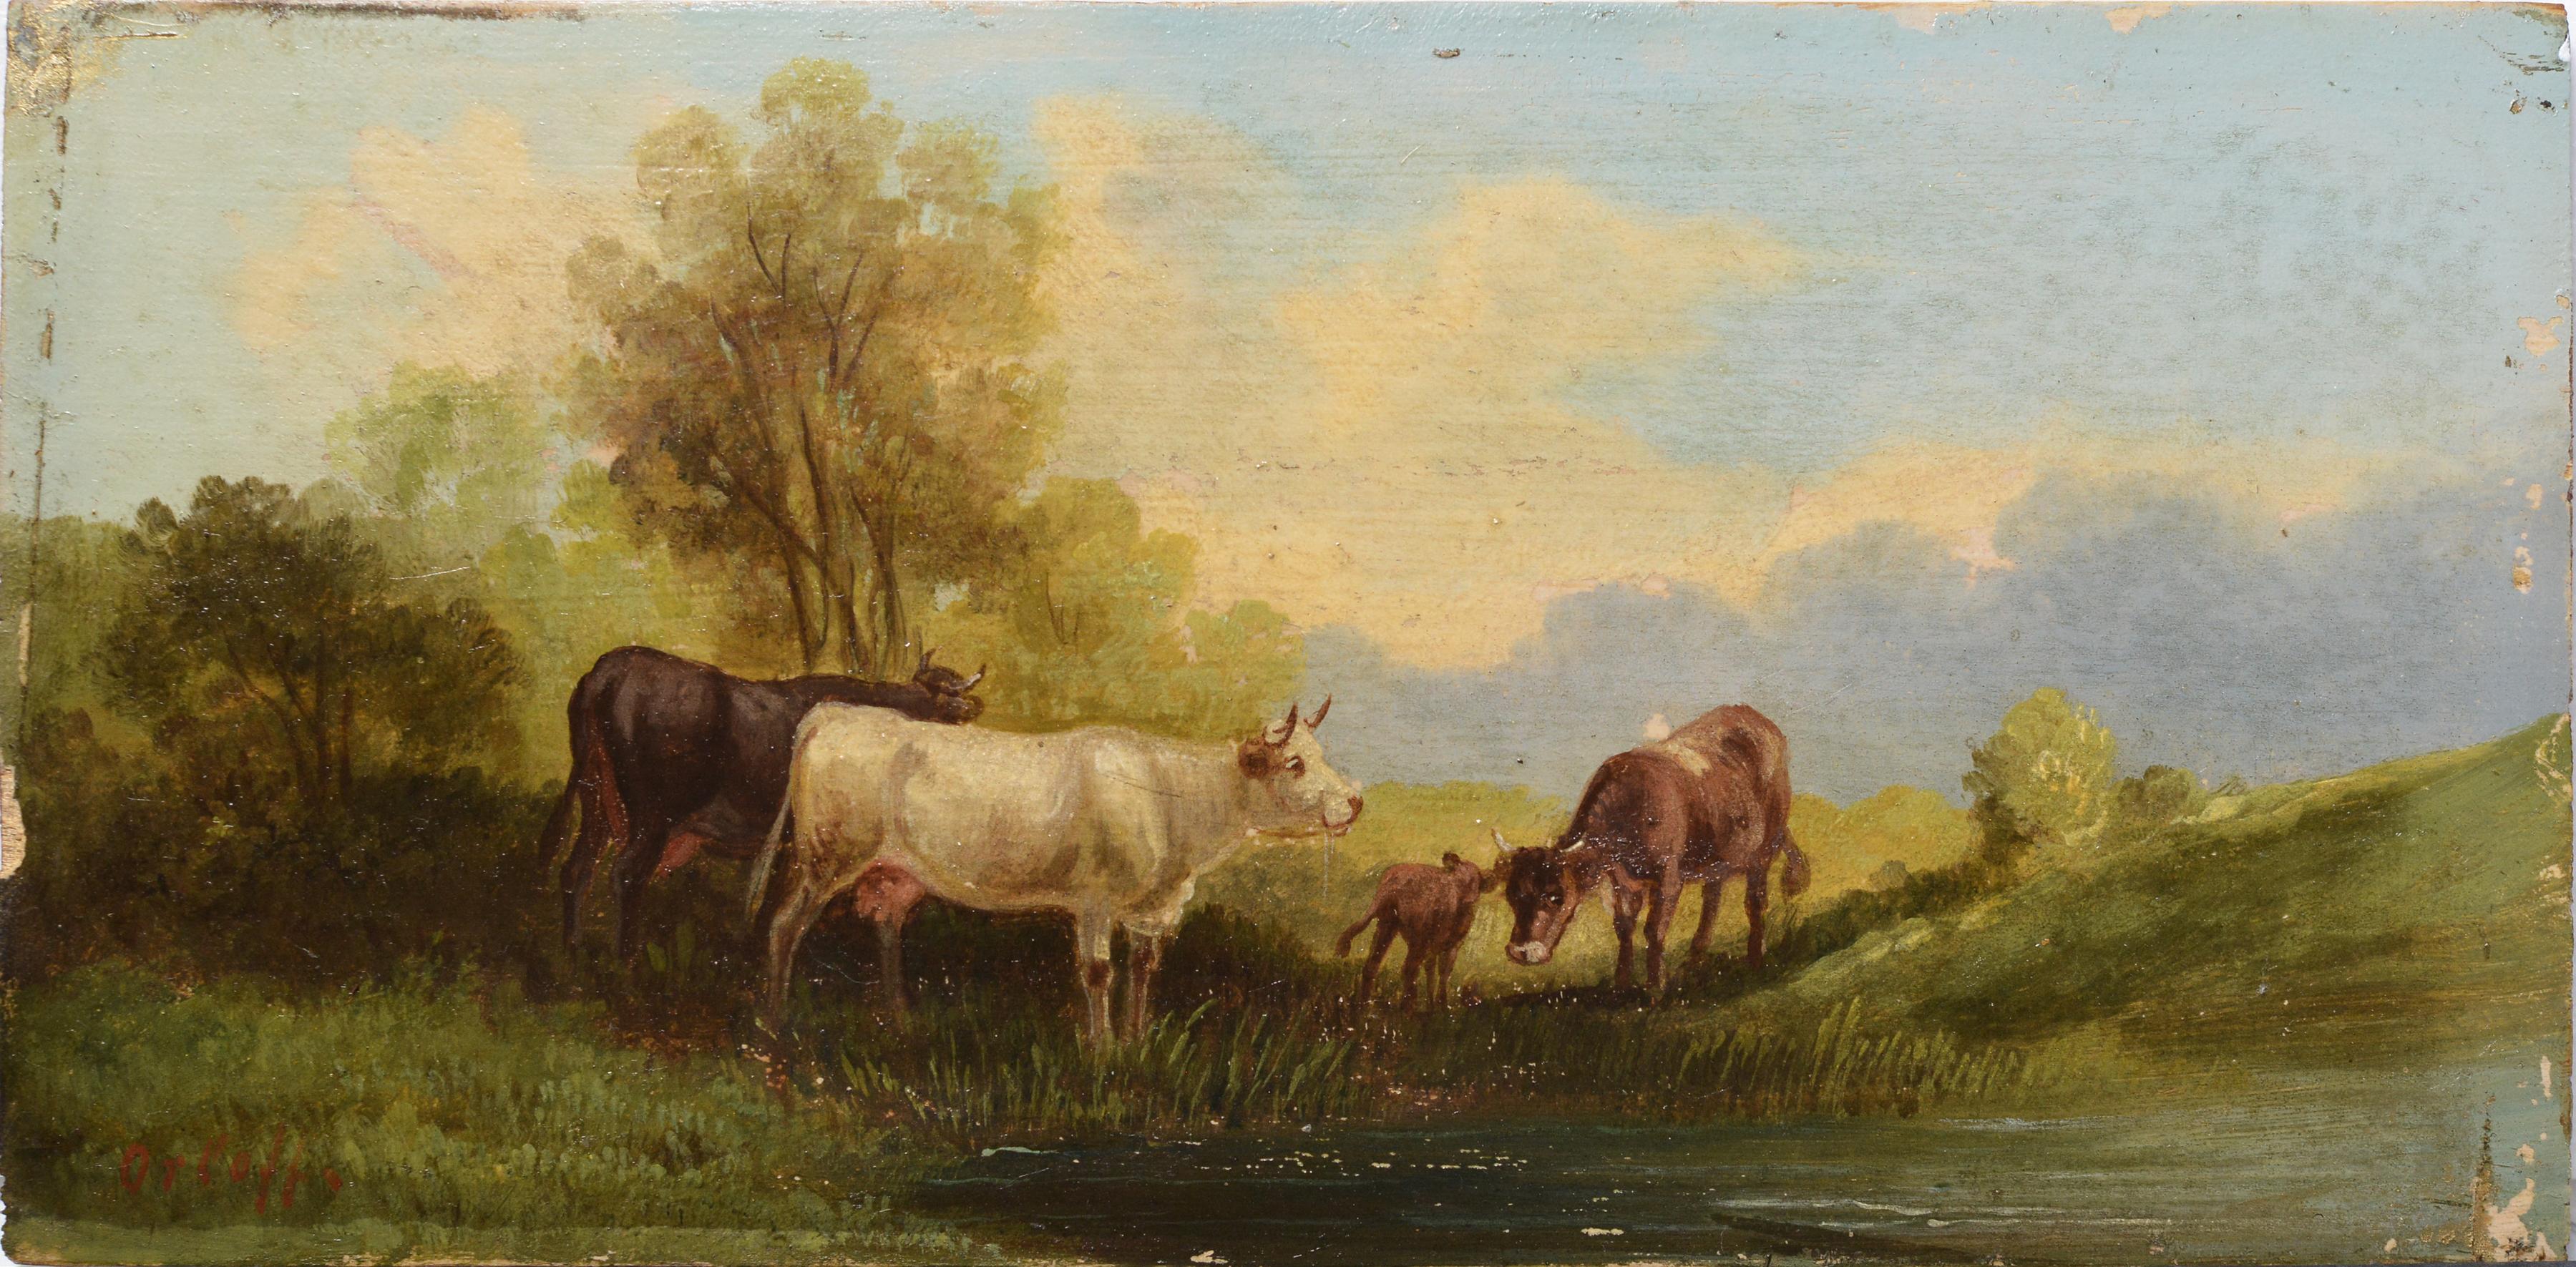 Pastoral Landscape w Cattle Cows 19th century Oil Painting by Russian Master - Brown Animal Painting by Jwan Petowitsch Orloff